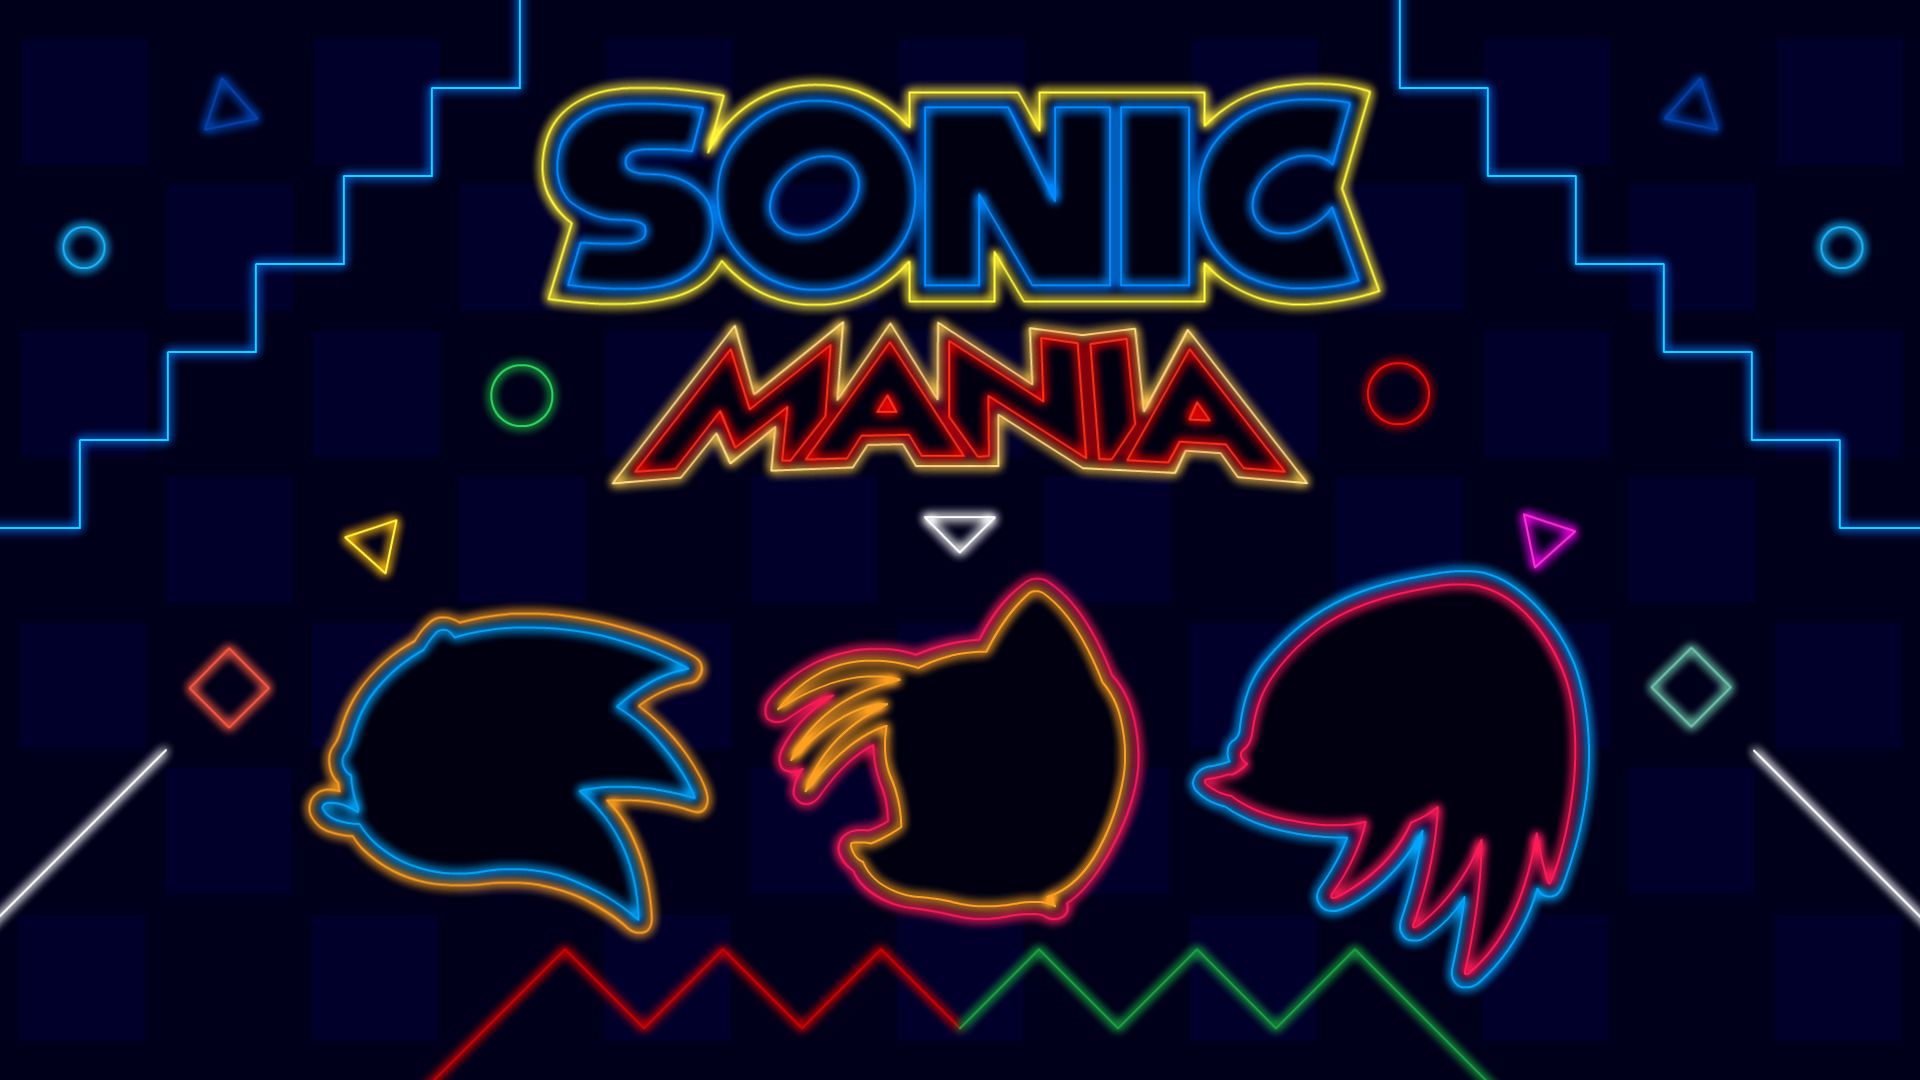 sonic mania, neon, video game, knuckles the echidna, miles 'tails' prower, sonic the hedgehog, sonic